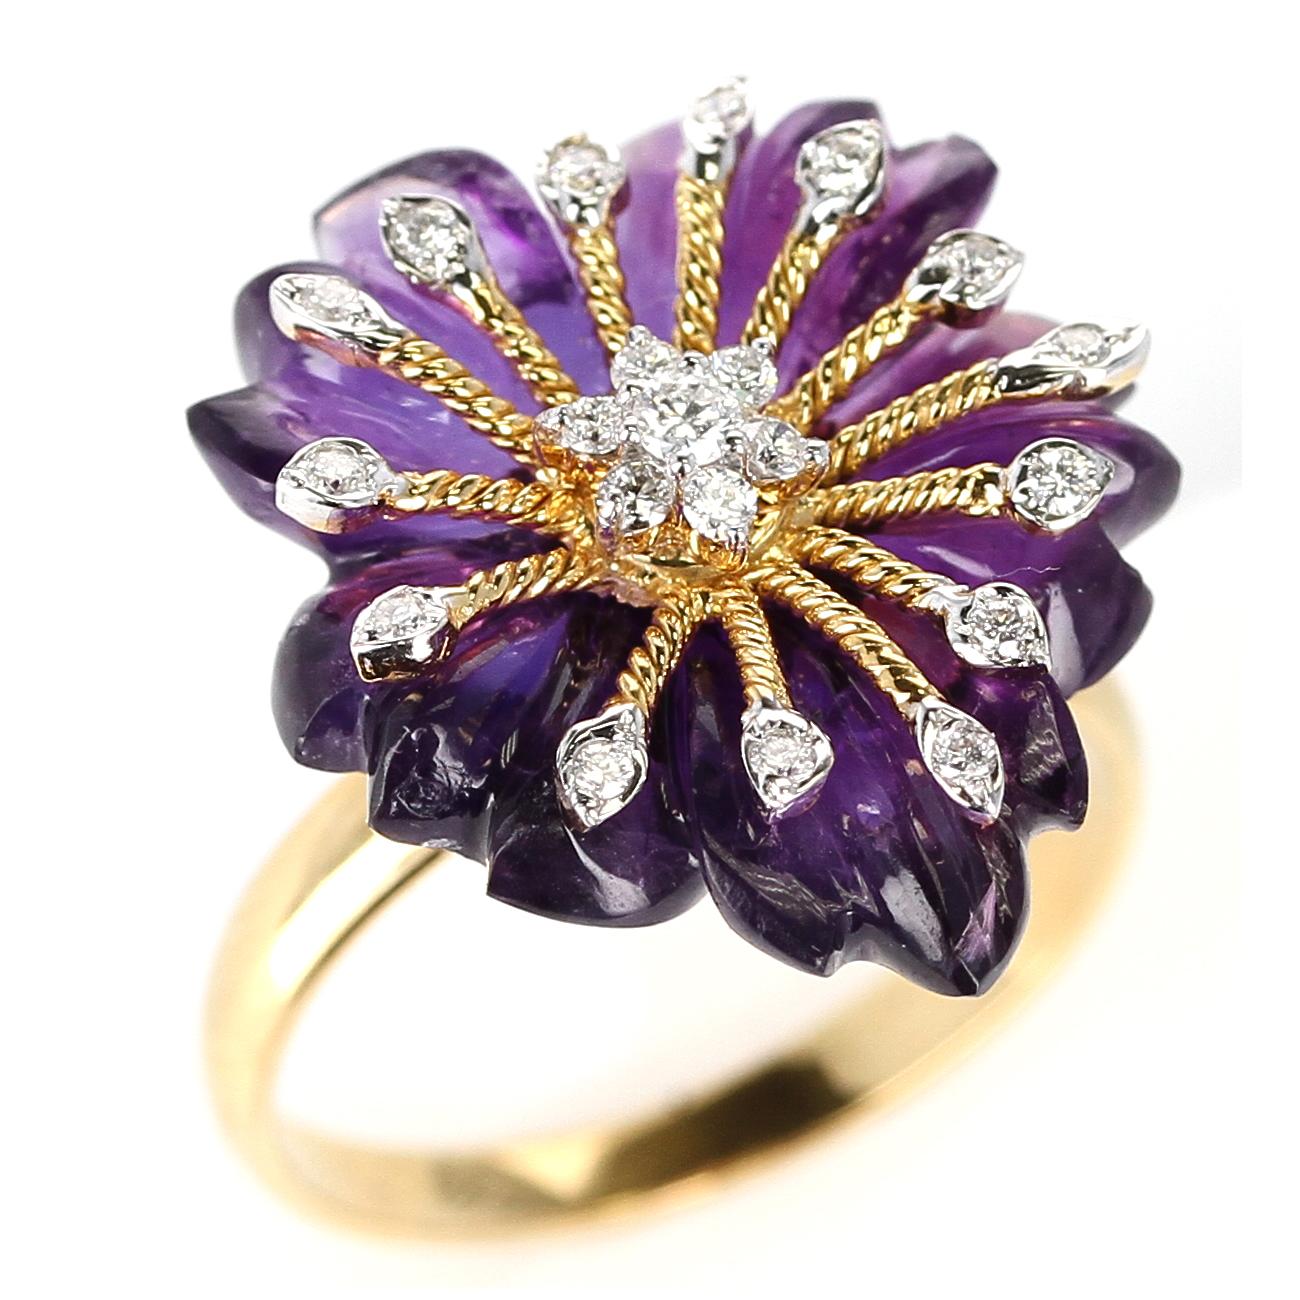  A stunning and intricate-work floral-style carved Amethyst with gold work and diamonds in a ring. Diamond Weight: 0.22 cts, Amethyst: 11.76 cts. 14K Yellow Gold. Matching Earrings available. Ring Size 8.  Metal type and stones can be customized. 